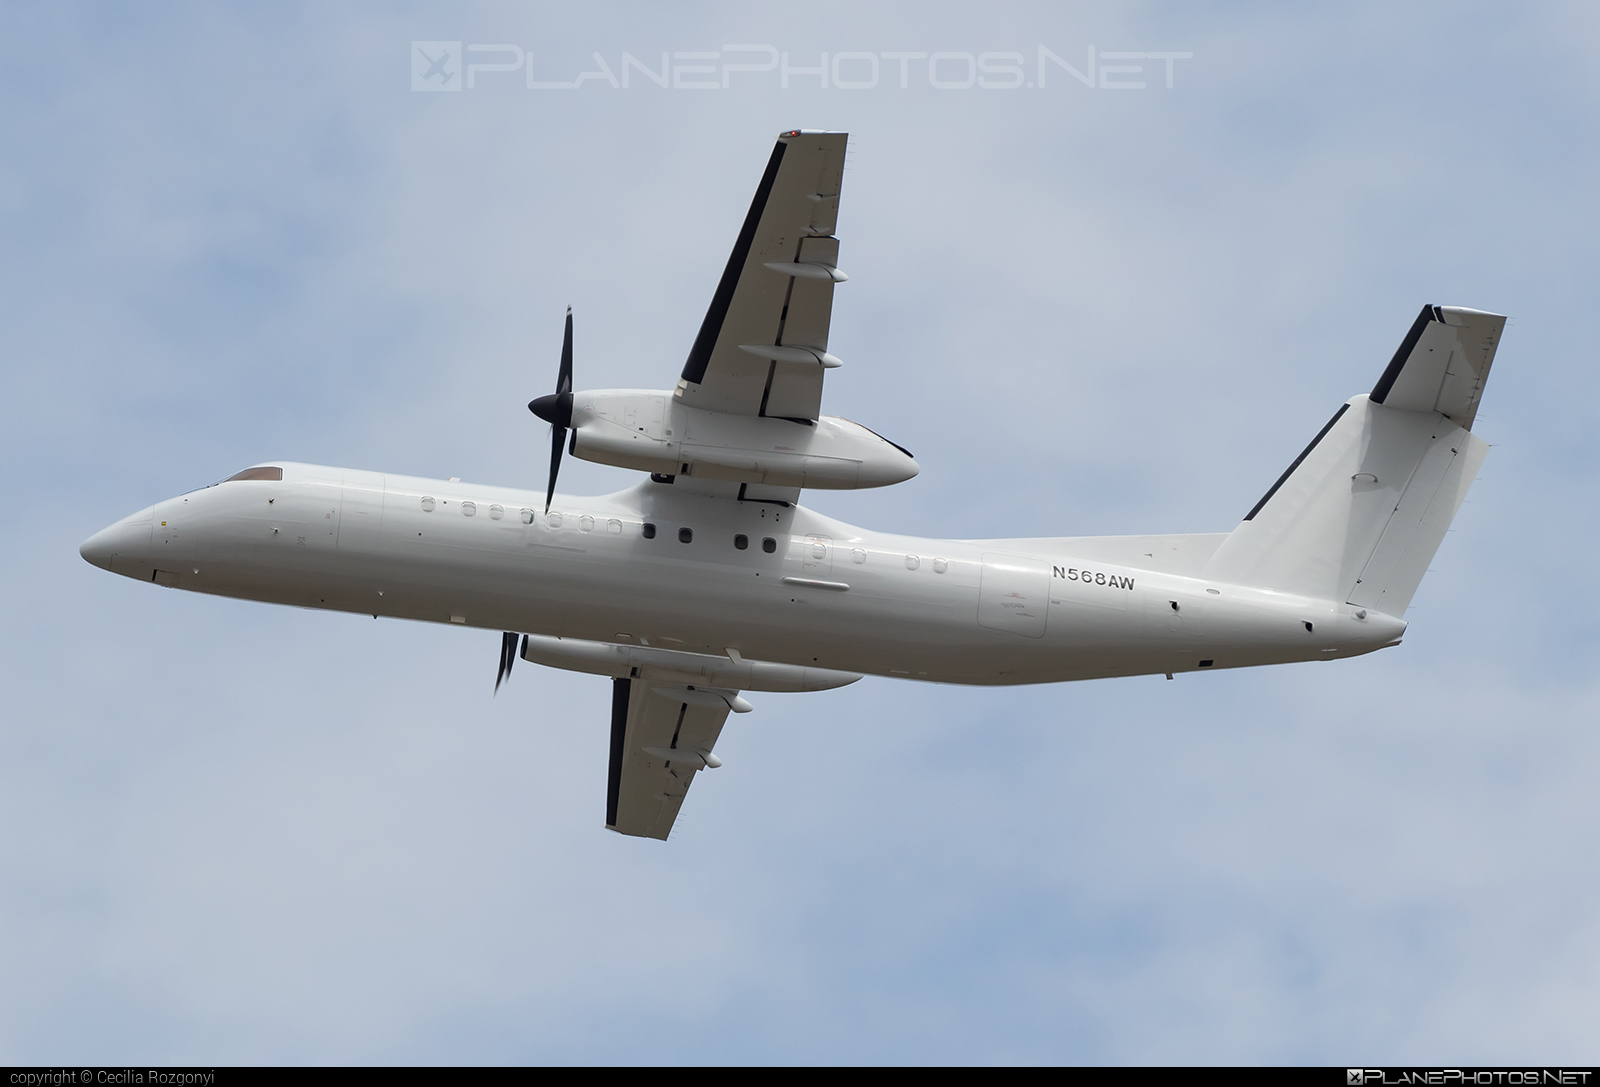 Bombardier DHC-8-315 Dash 8 - N568AW operated by United States Department of State #DepartmentOfState #USdepartmentOfState #UnitedStatesDepartmentOfState #bombardier